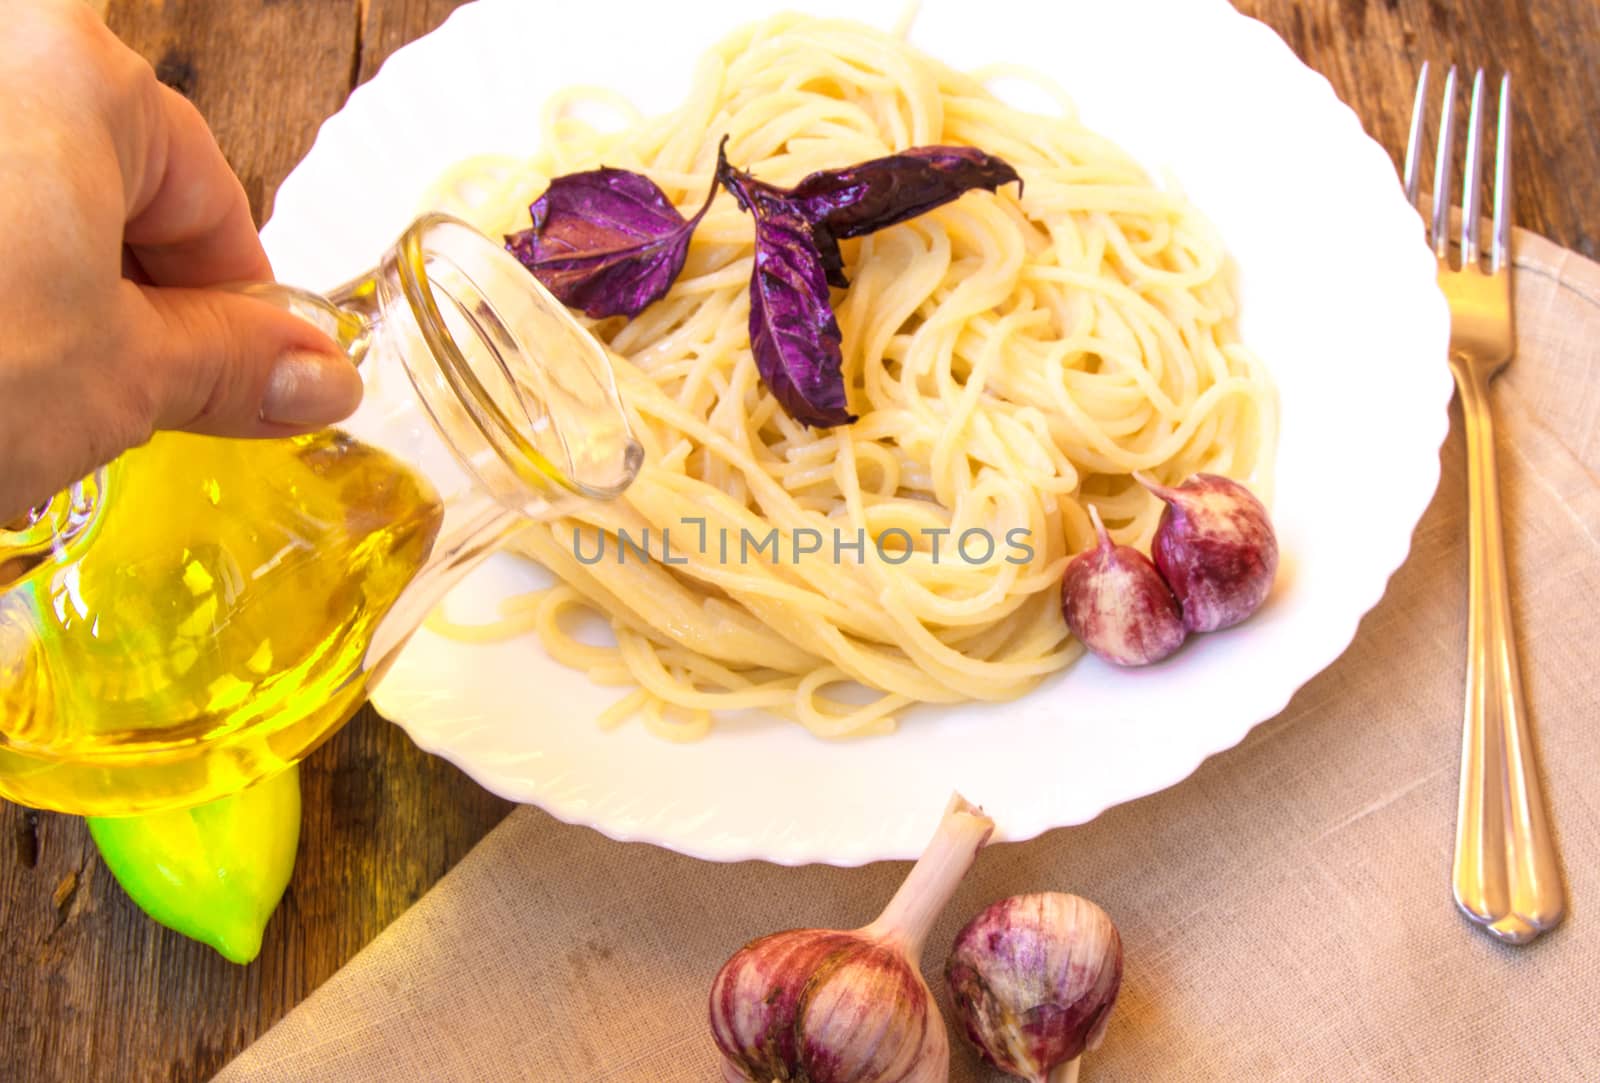 Italian cuisine, spaghetti with Basil and garlic, a woman's hand holding a glass jug of olive oil.